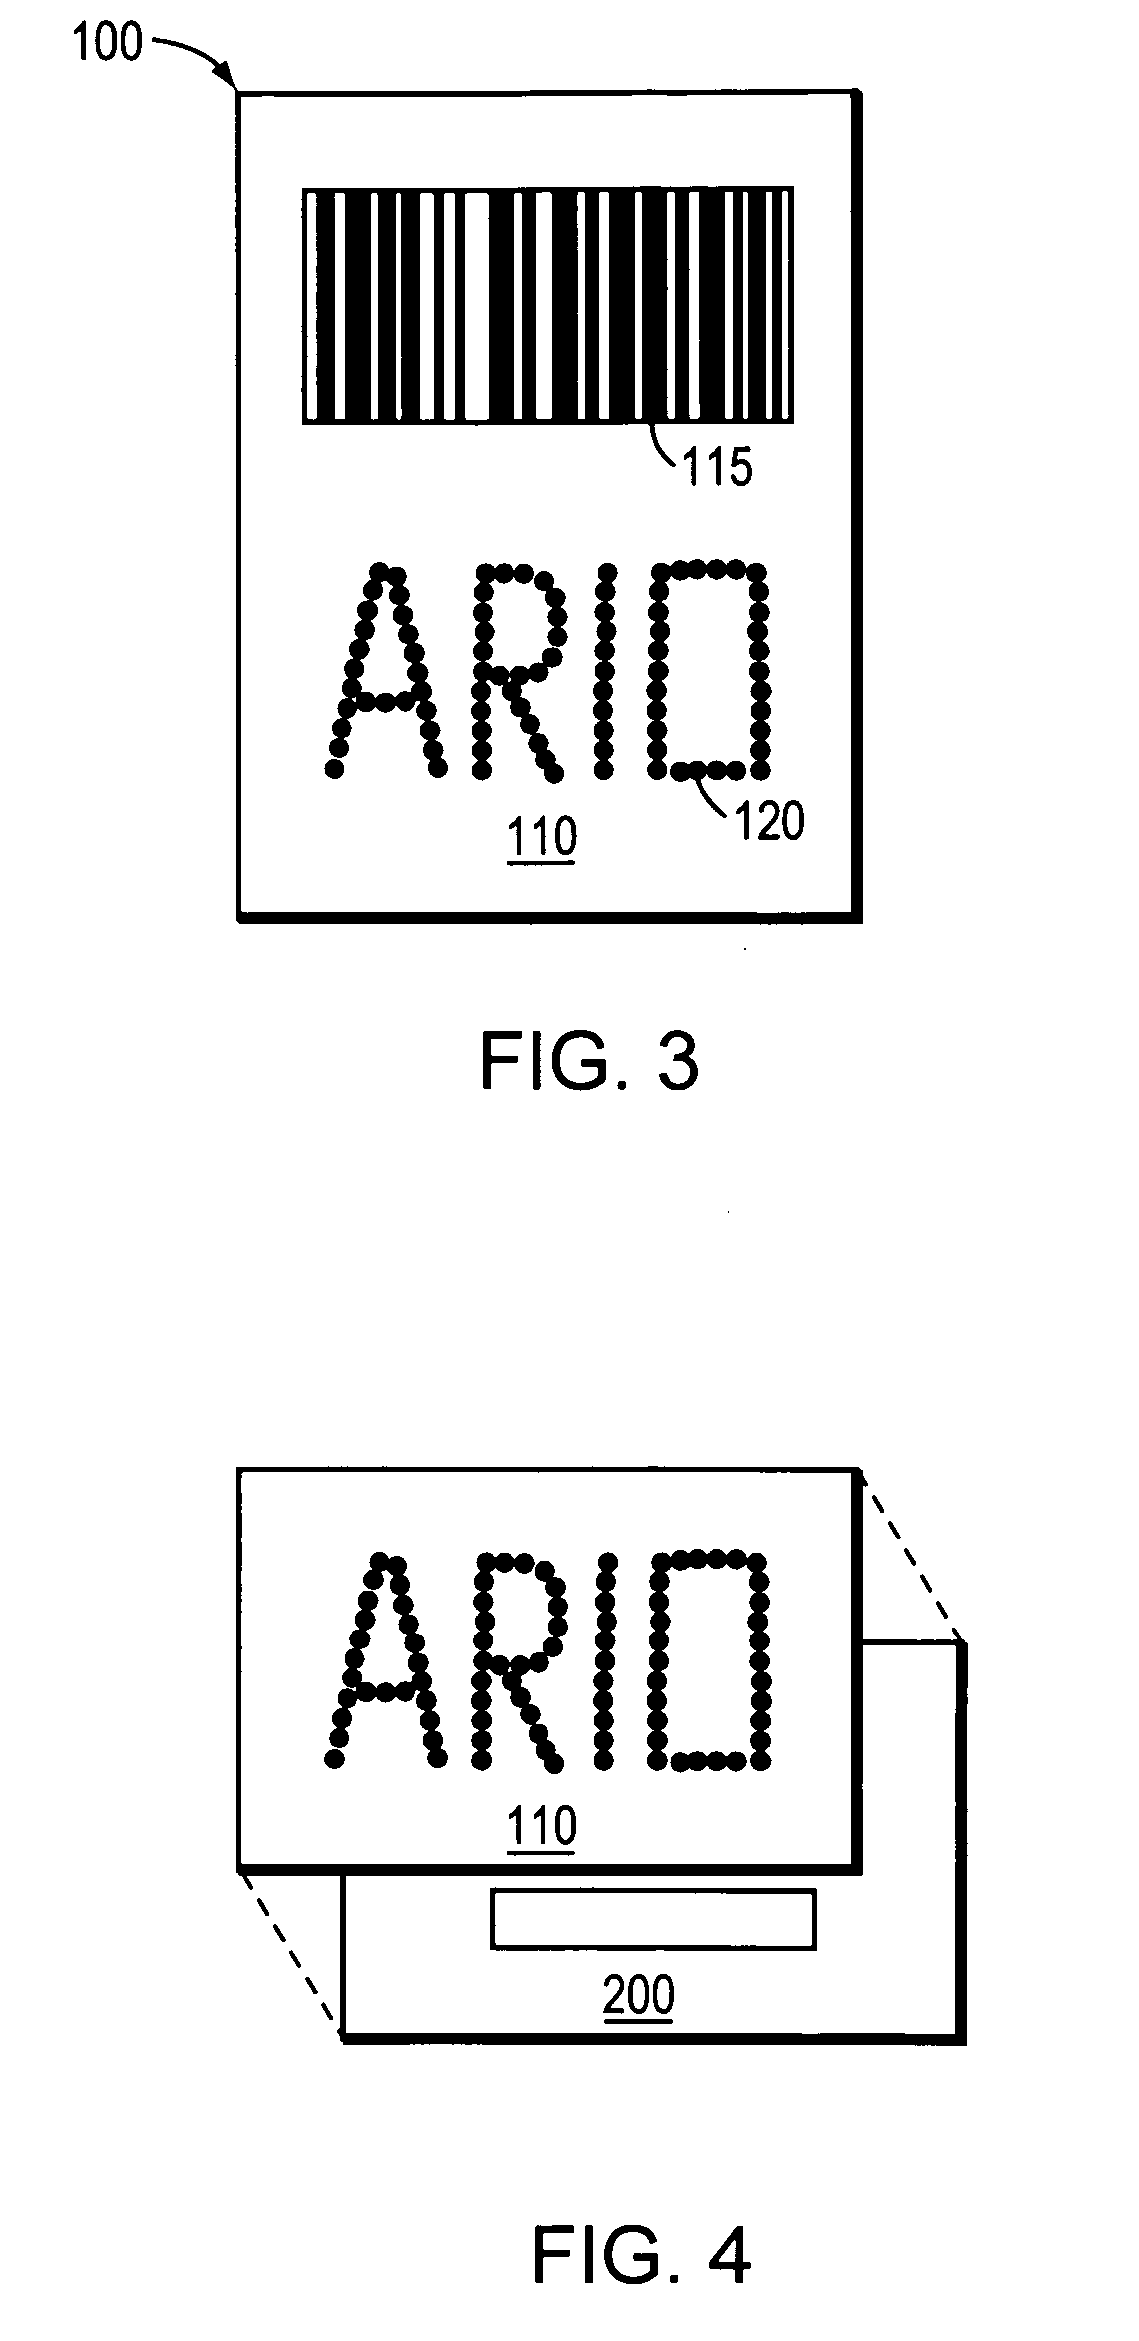 Electronic shipping label with updateable visual display